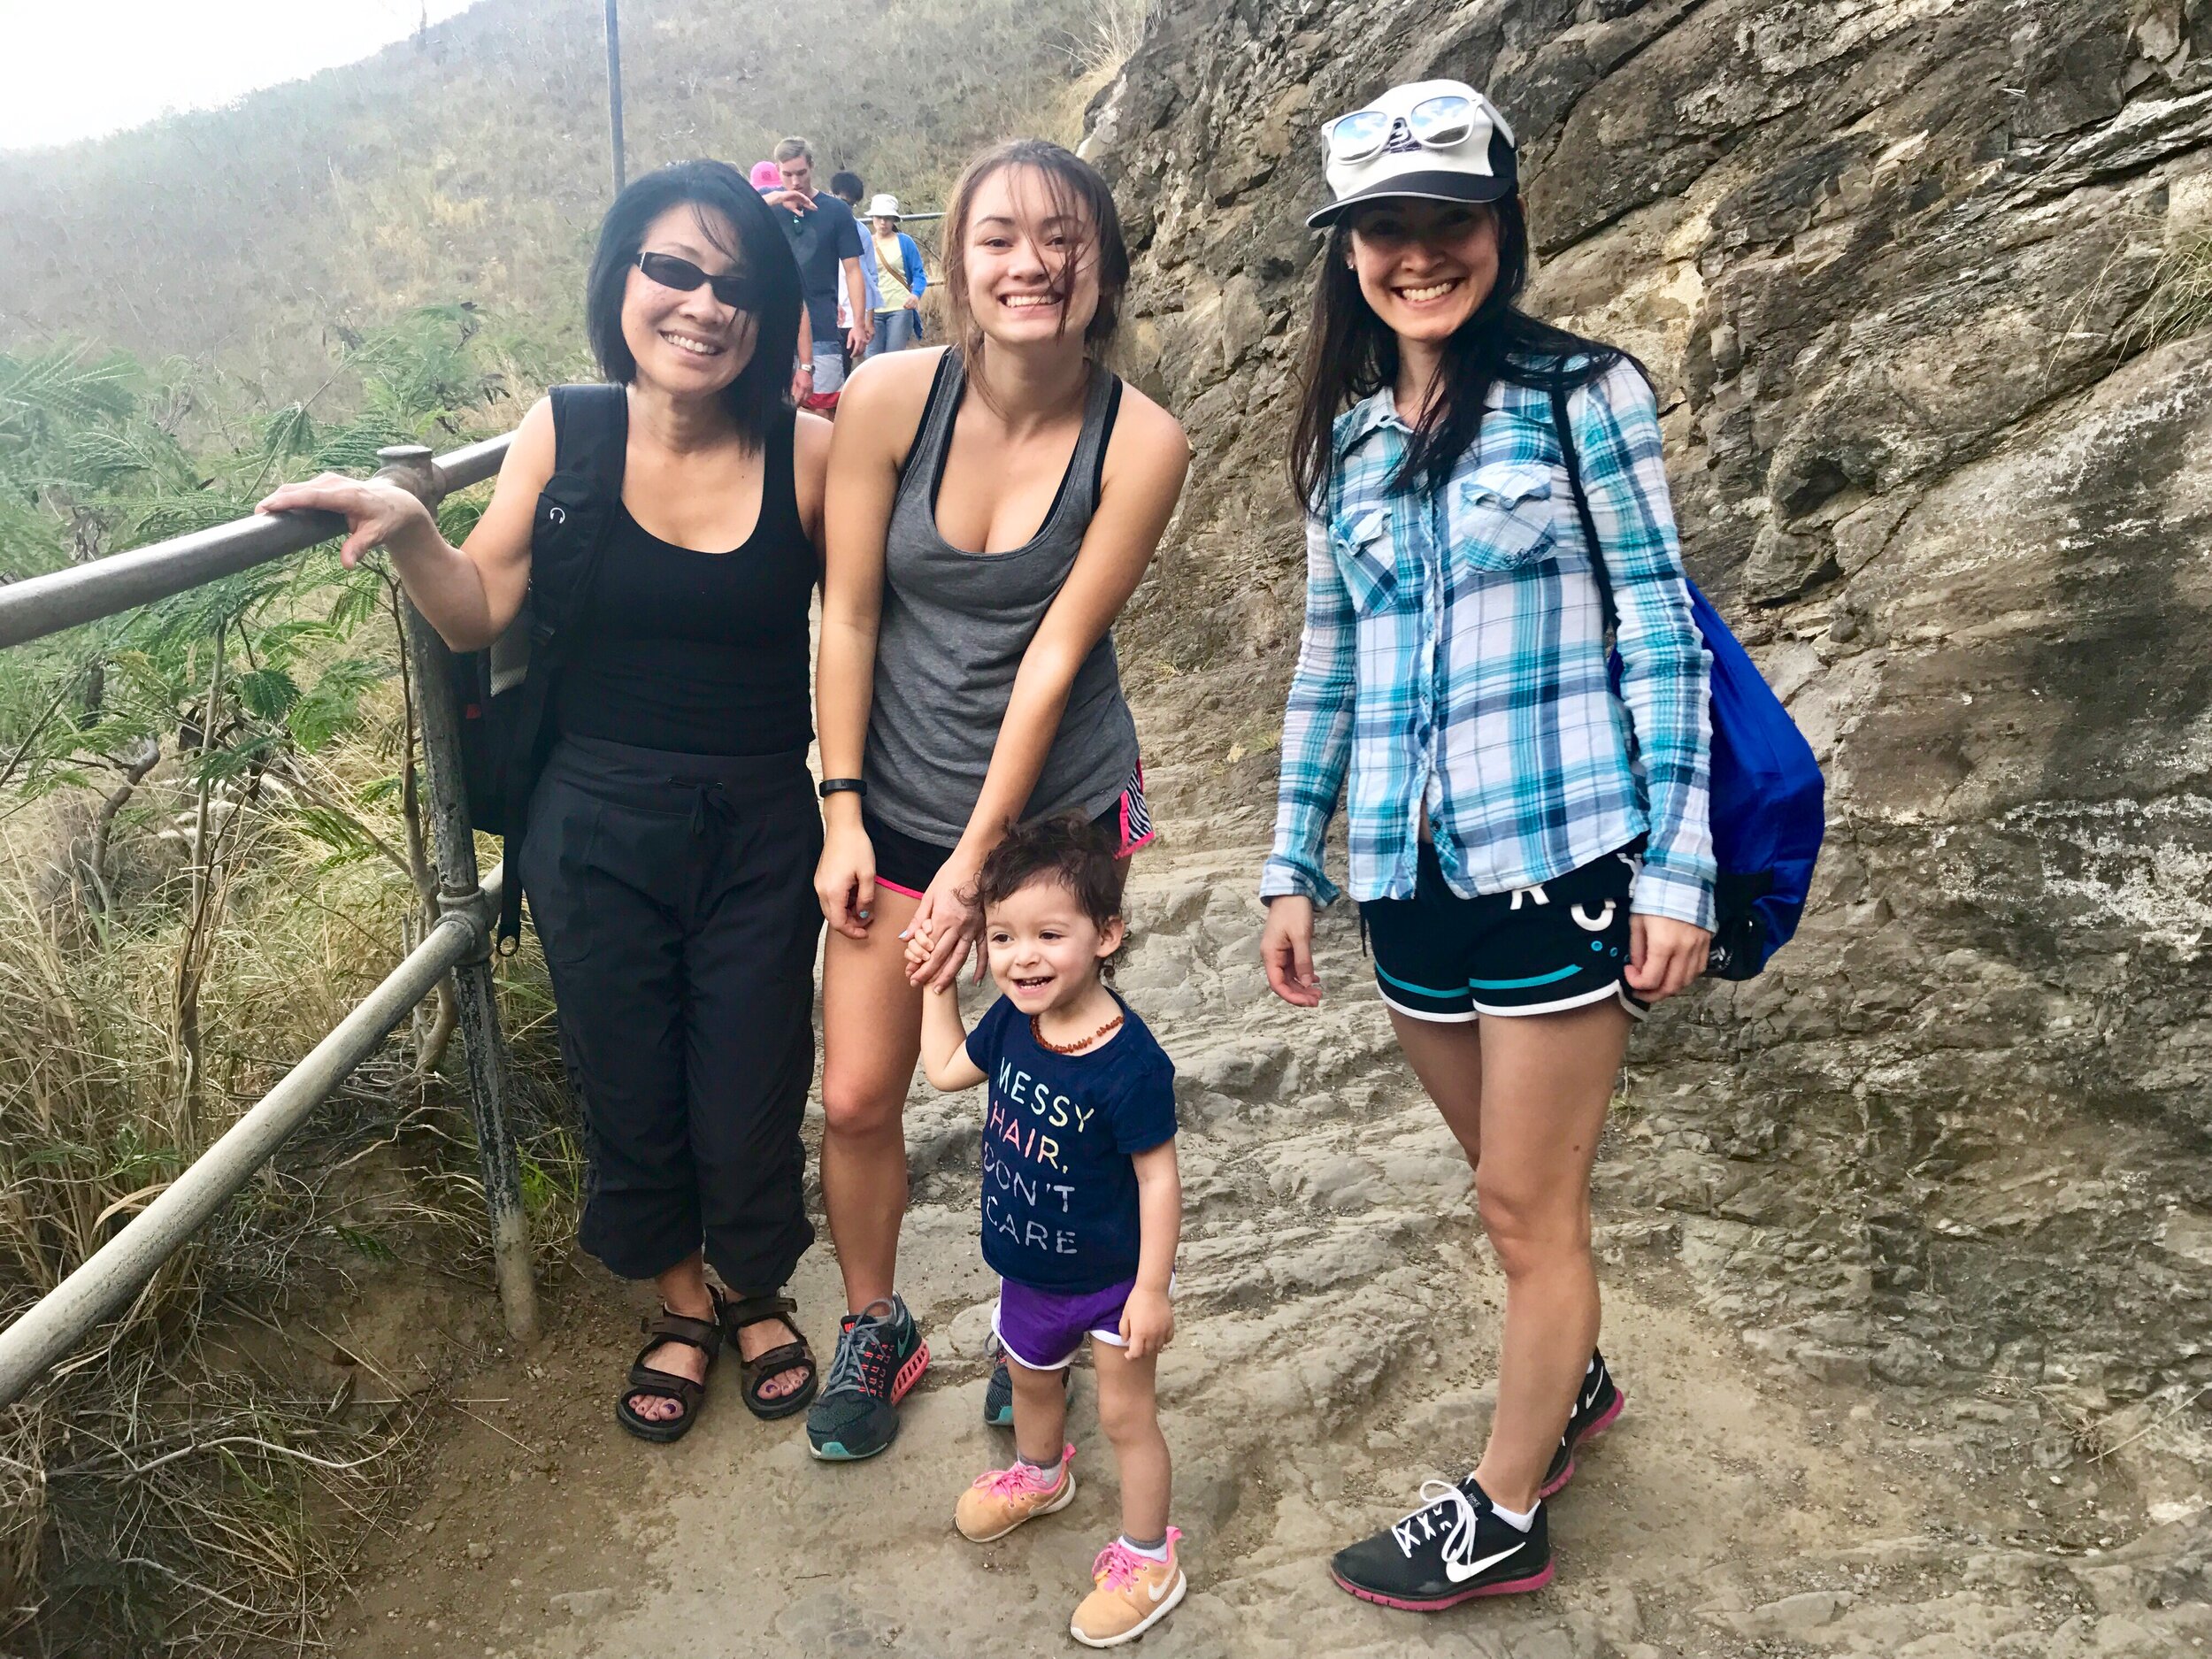 Oahu is the perfect winter destination for young families, find out where to play, stay and eat gluten free. Visit shortsweetmom.com for awesome travel tips. 